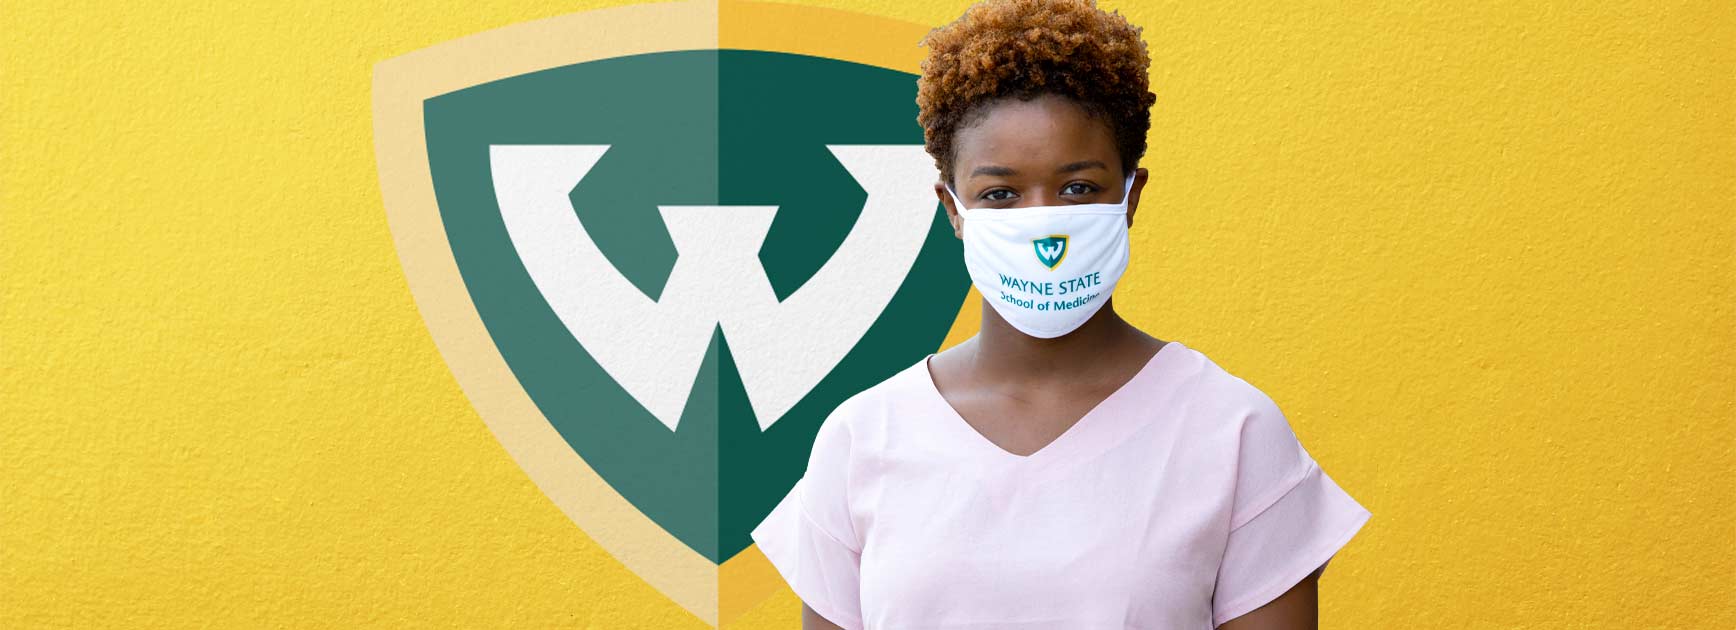 Woman wearing a cloth mask standing in front of the WSU shield on a yellow wall